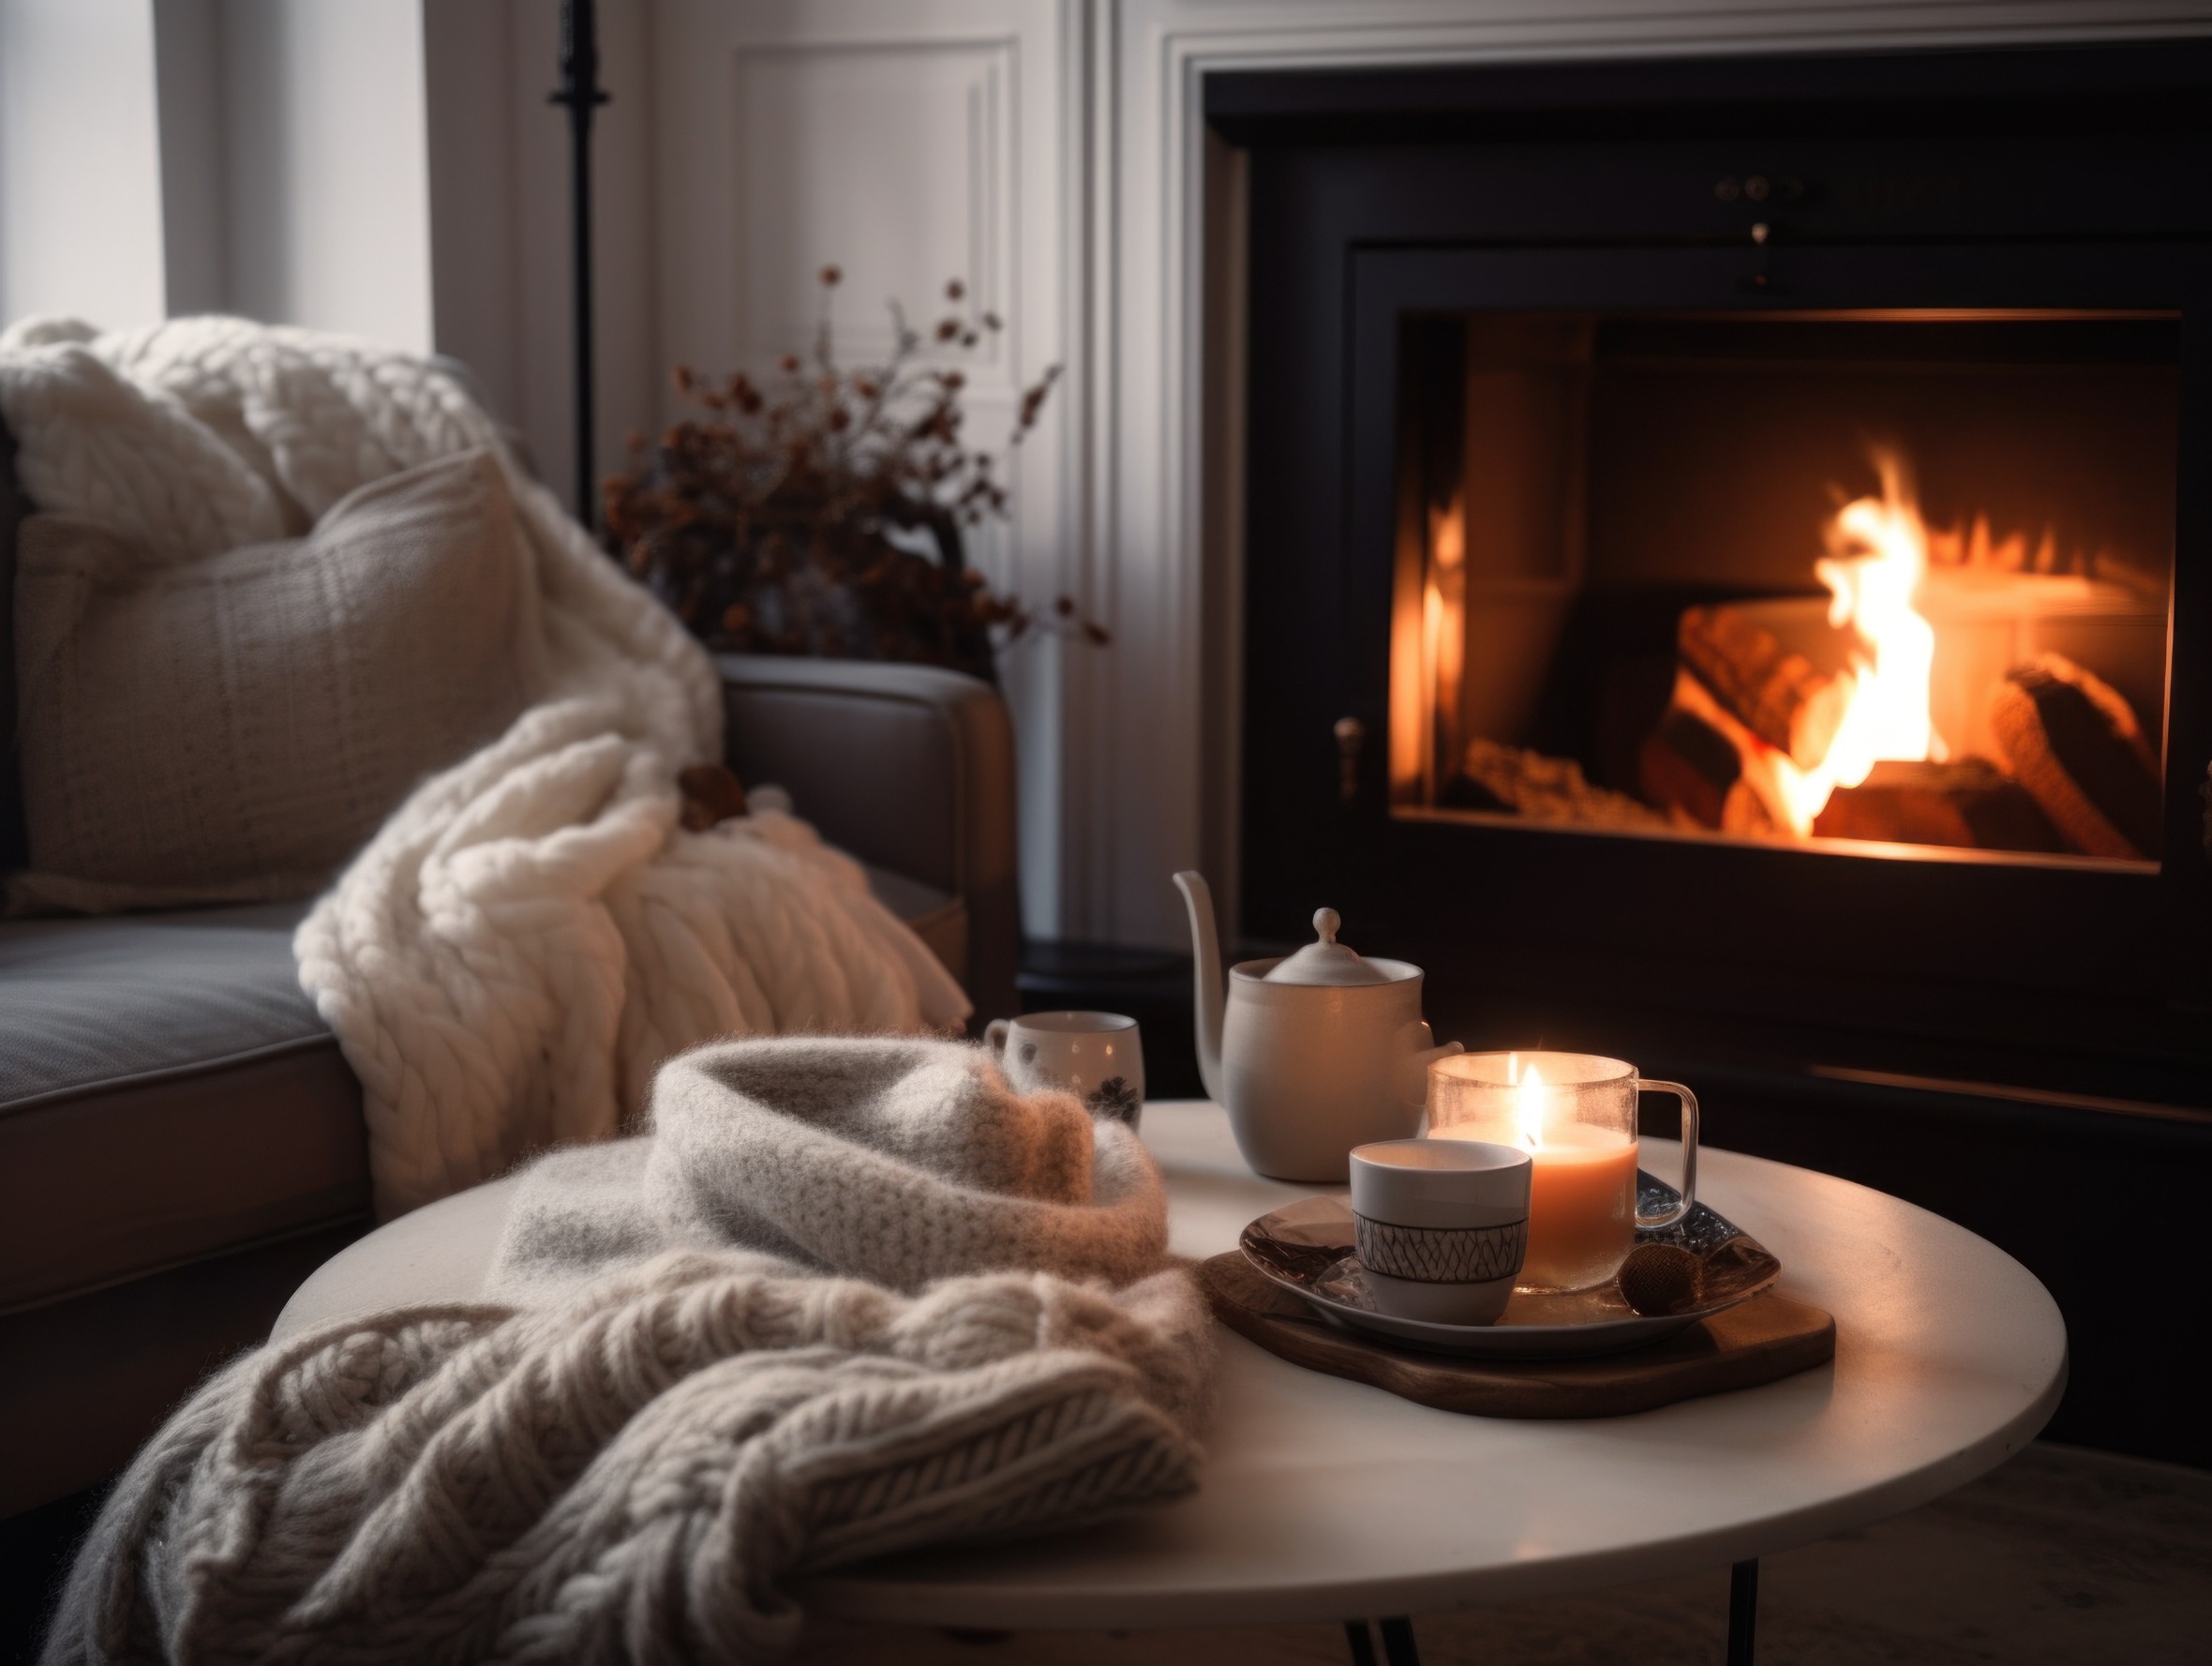 A cozy Living room with a fireplace during winters